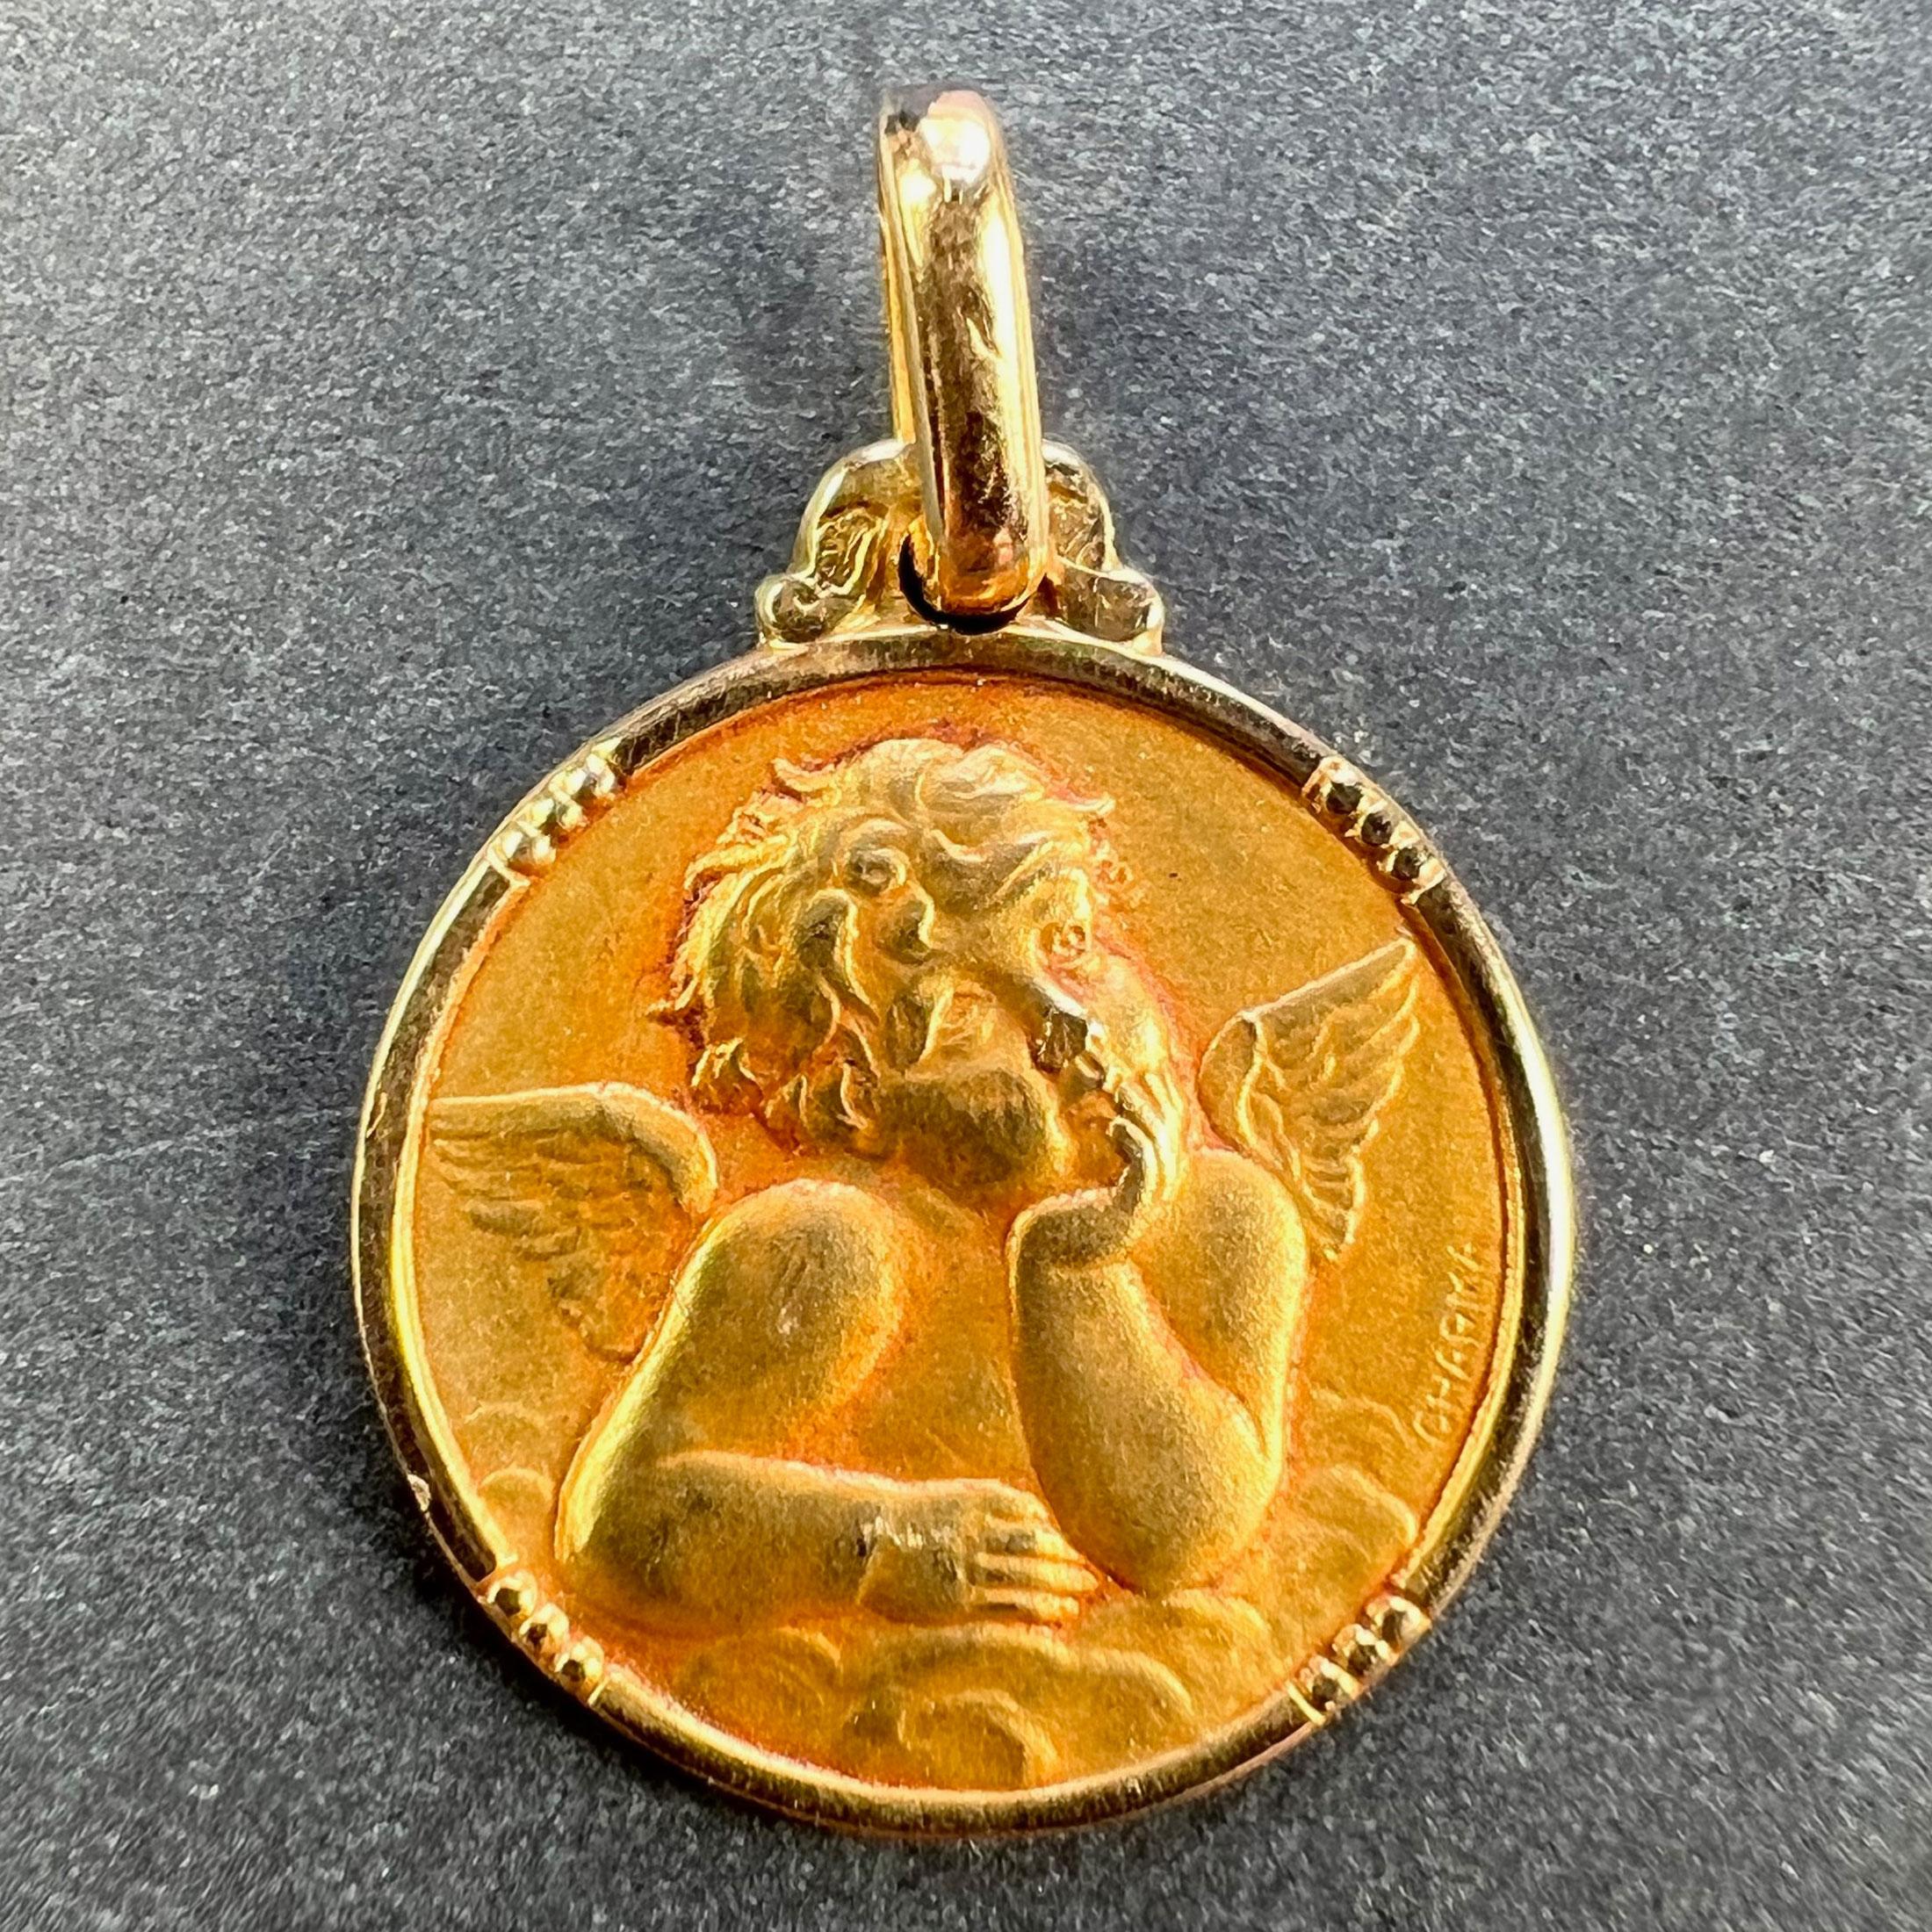 A French 18 karat (18K) yellow gold charm pendant designed as a round medal depicting Raphael’s cherub. Signed Charma. Stamped with the eagle mark for 18 karat gold and French manufacture with an unknown maker's mark.

Dimensions: 1.7 x 1.4 x 0.1 cm